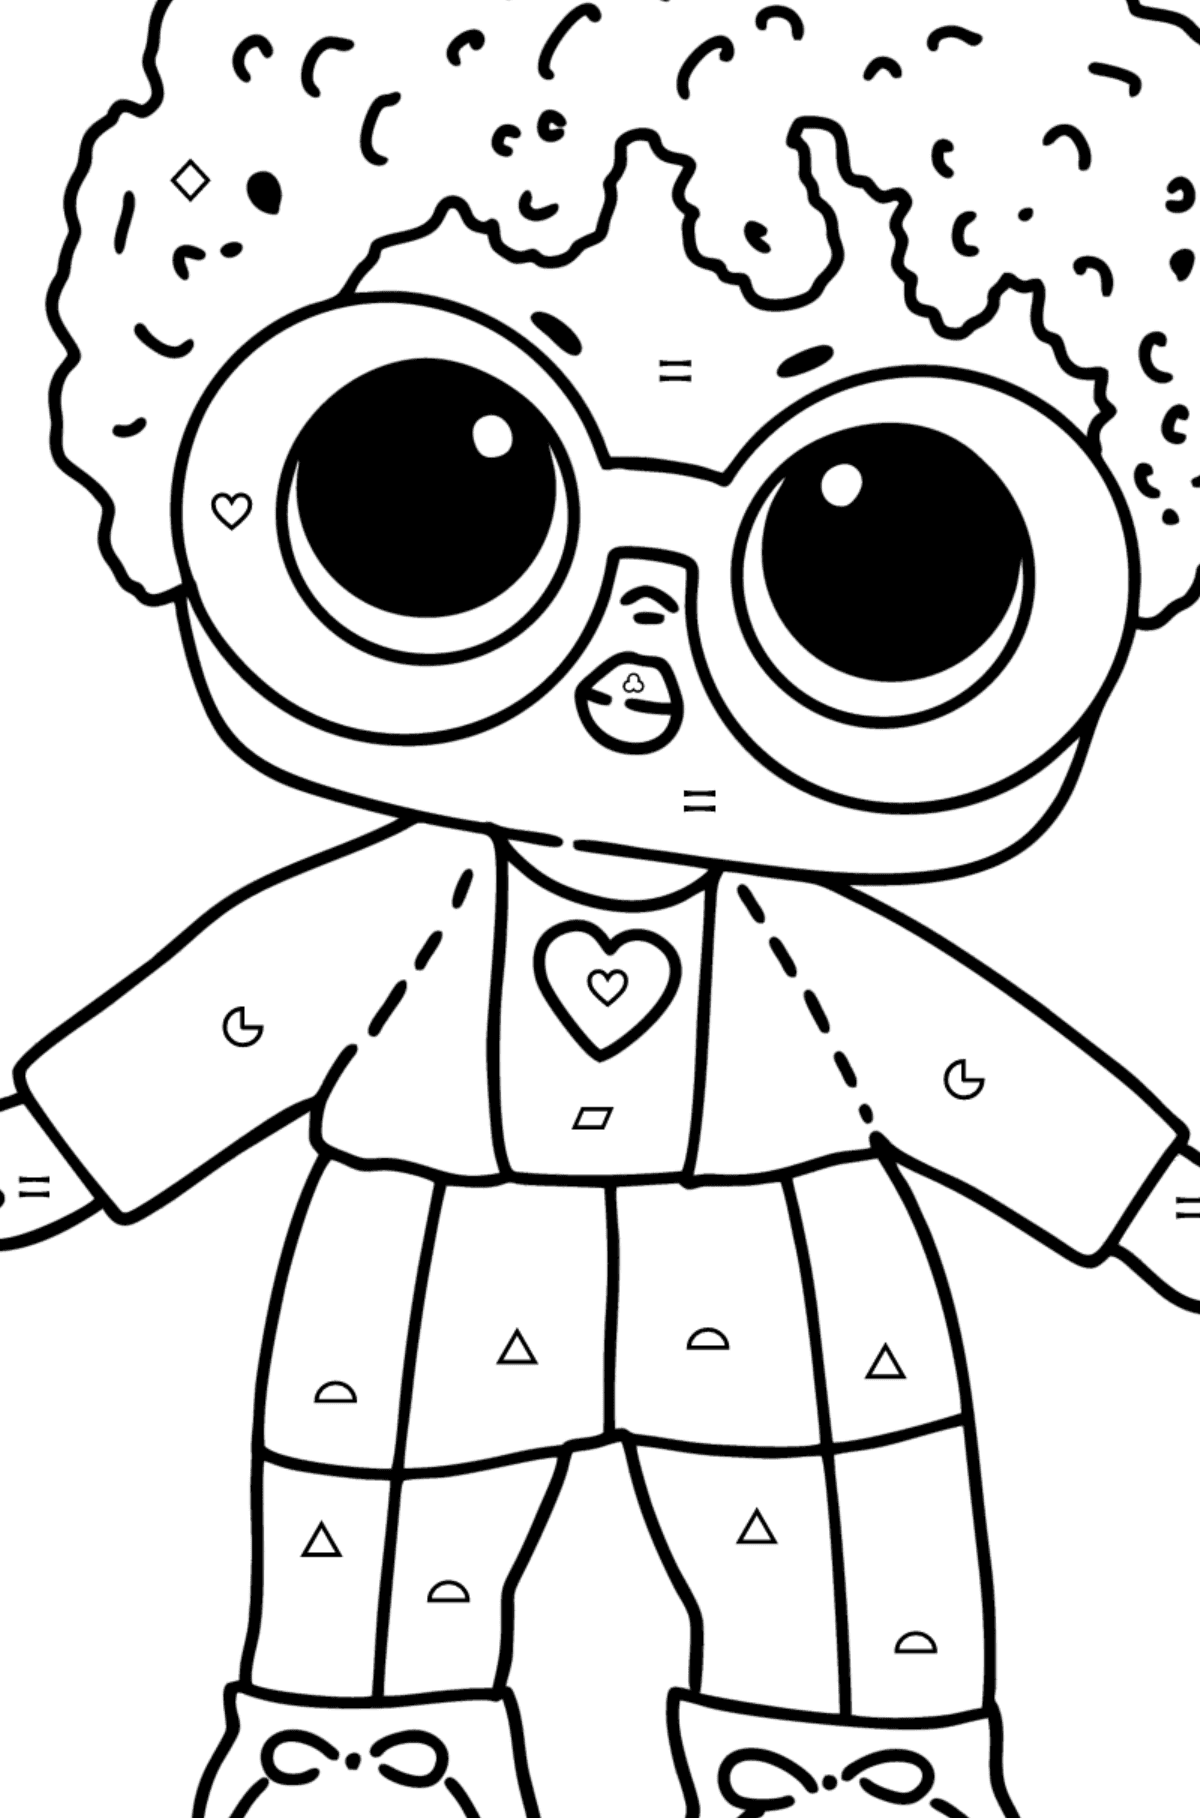 LOL Surprise Steezy Doll Boy coloring page - Coloring by Symbols and Geometric Shapes for Kids